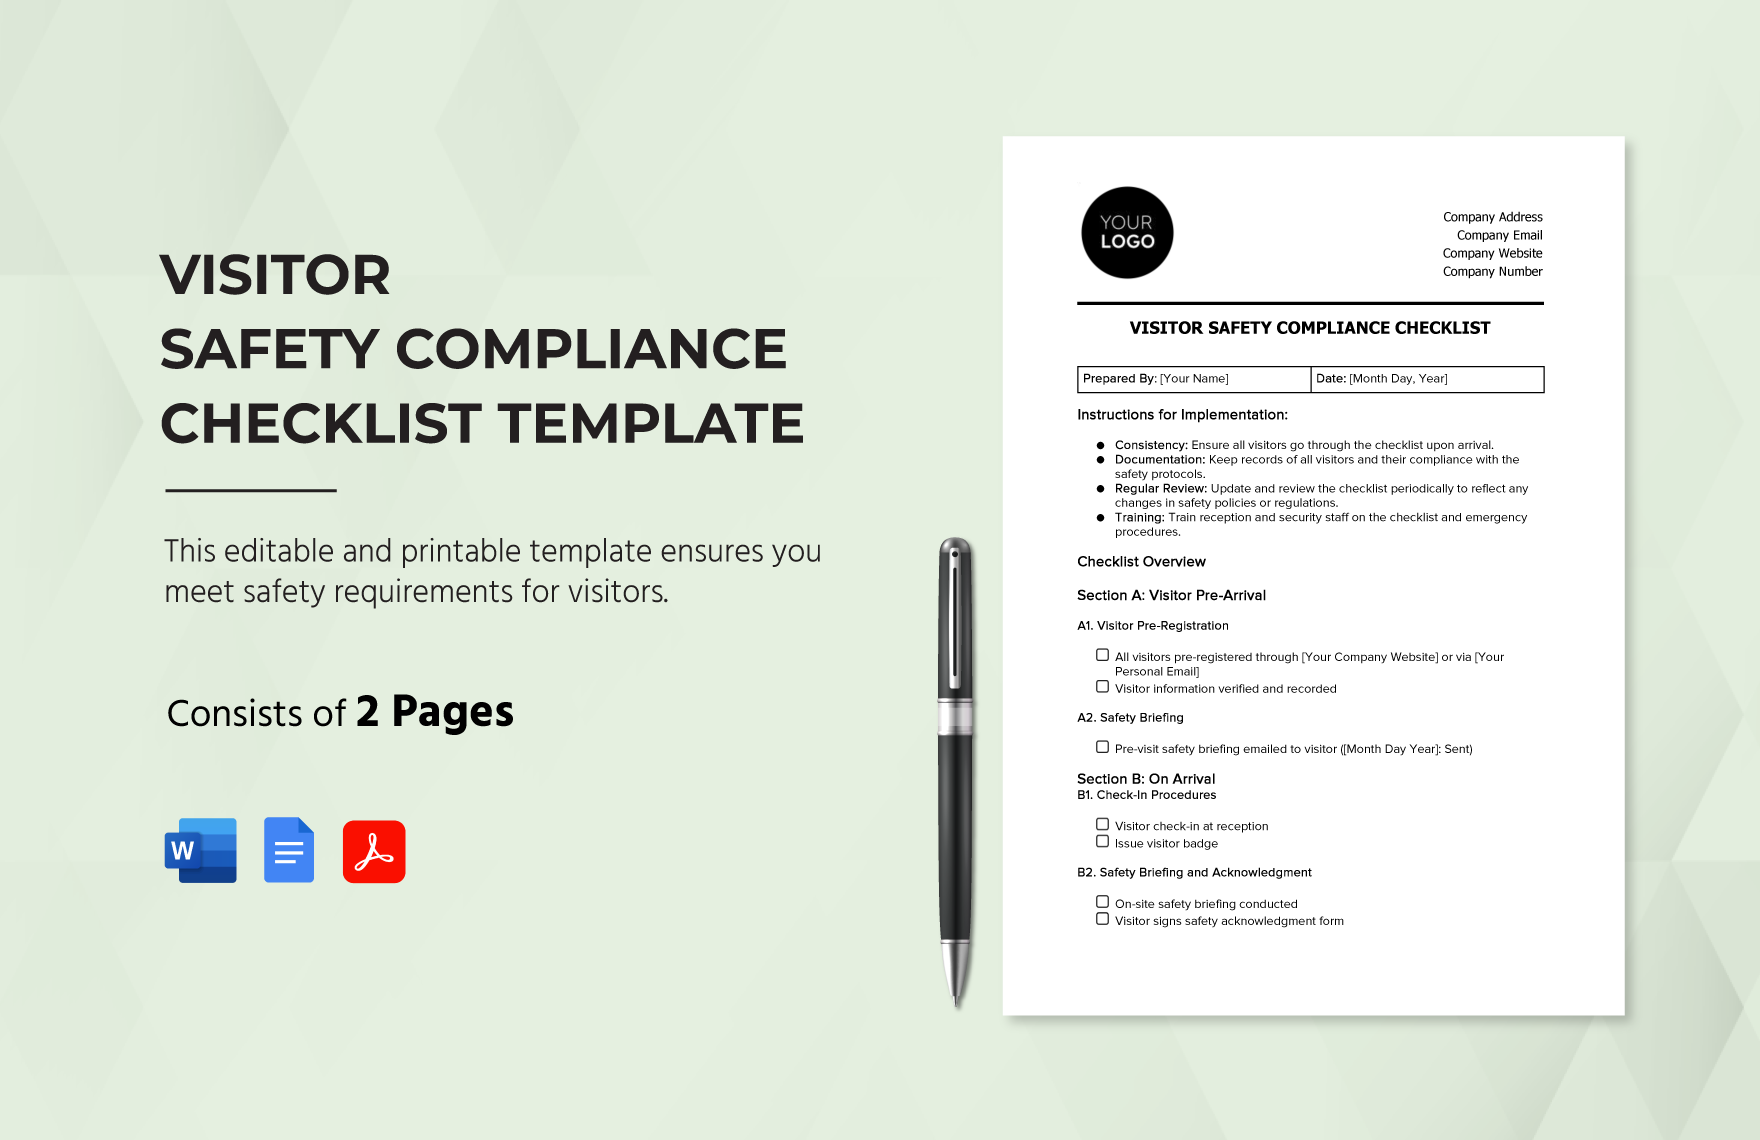 Visitor Safety Compliance Checklist Template